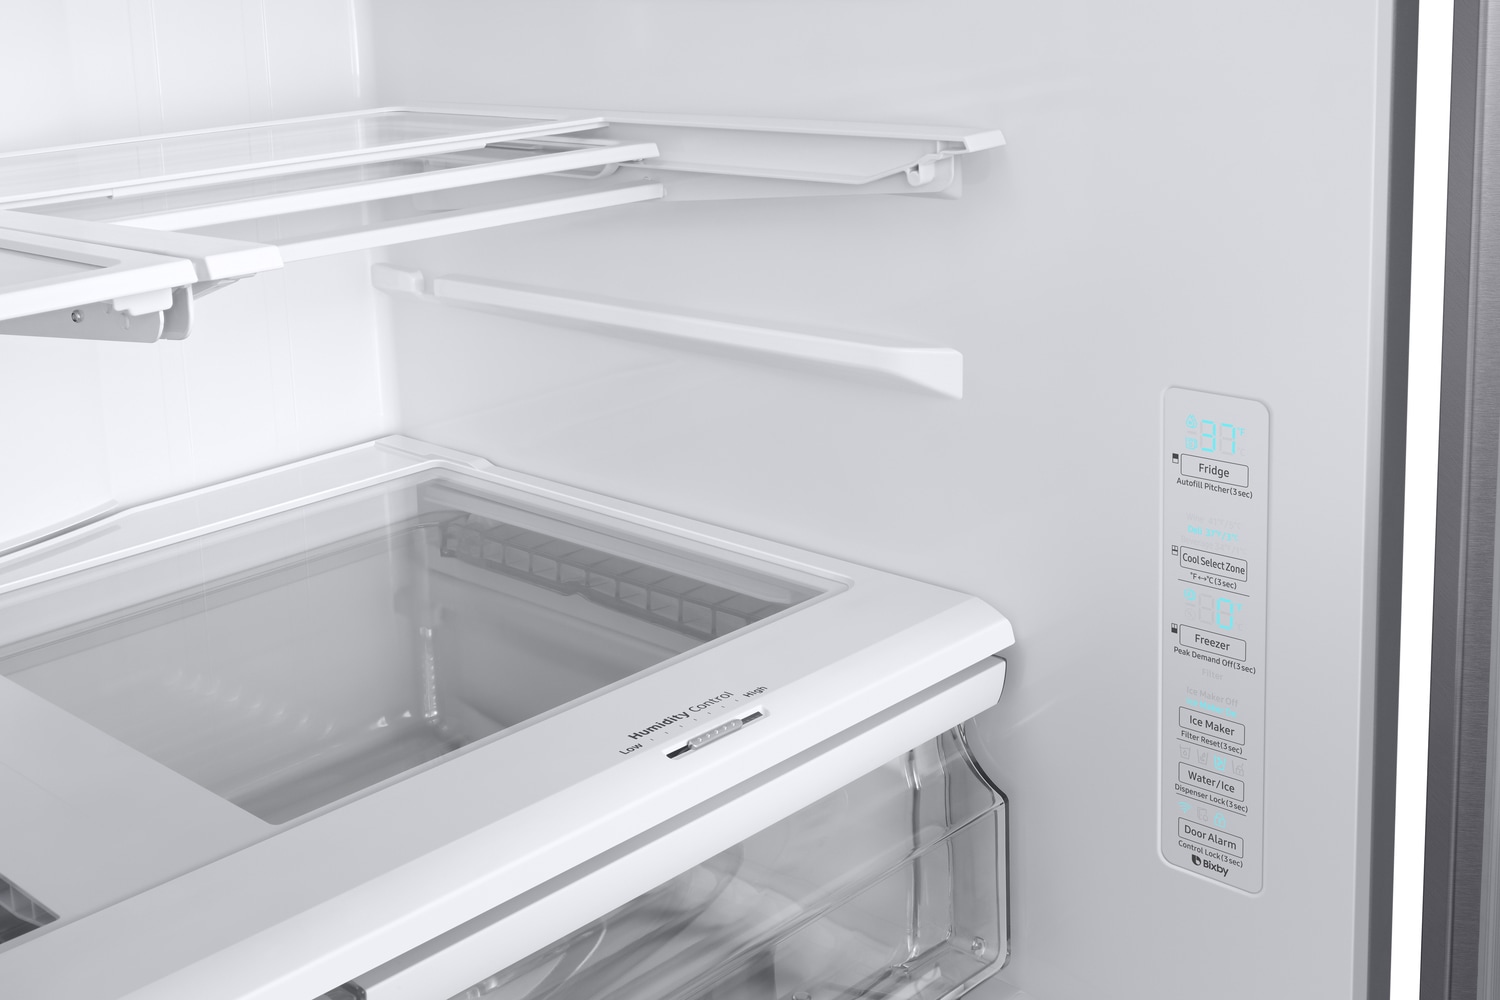 Lowes has $900 off a Samsung 28.2 cu. ft. French Door Refrigerator with Ice  Maker 